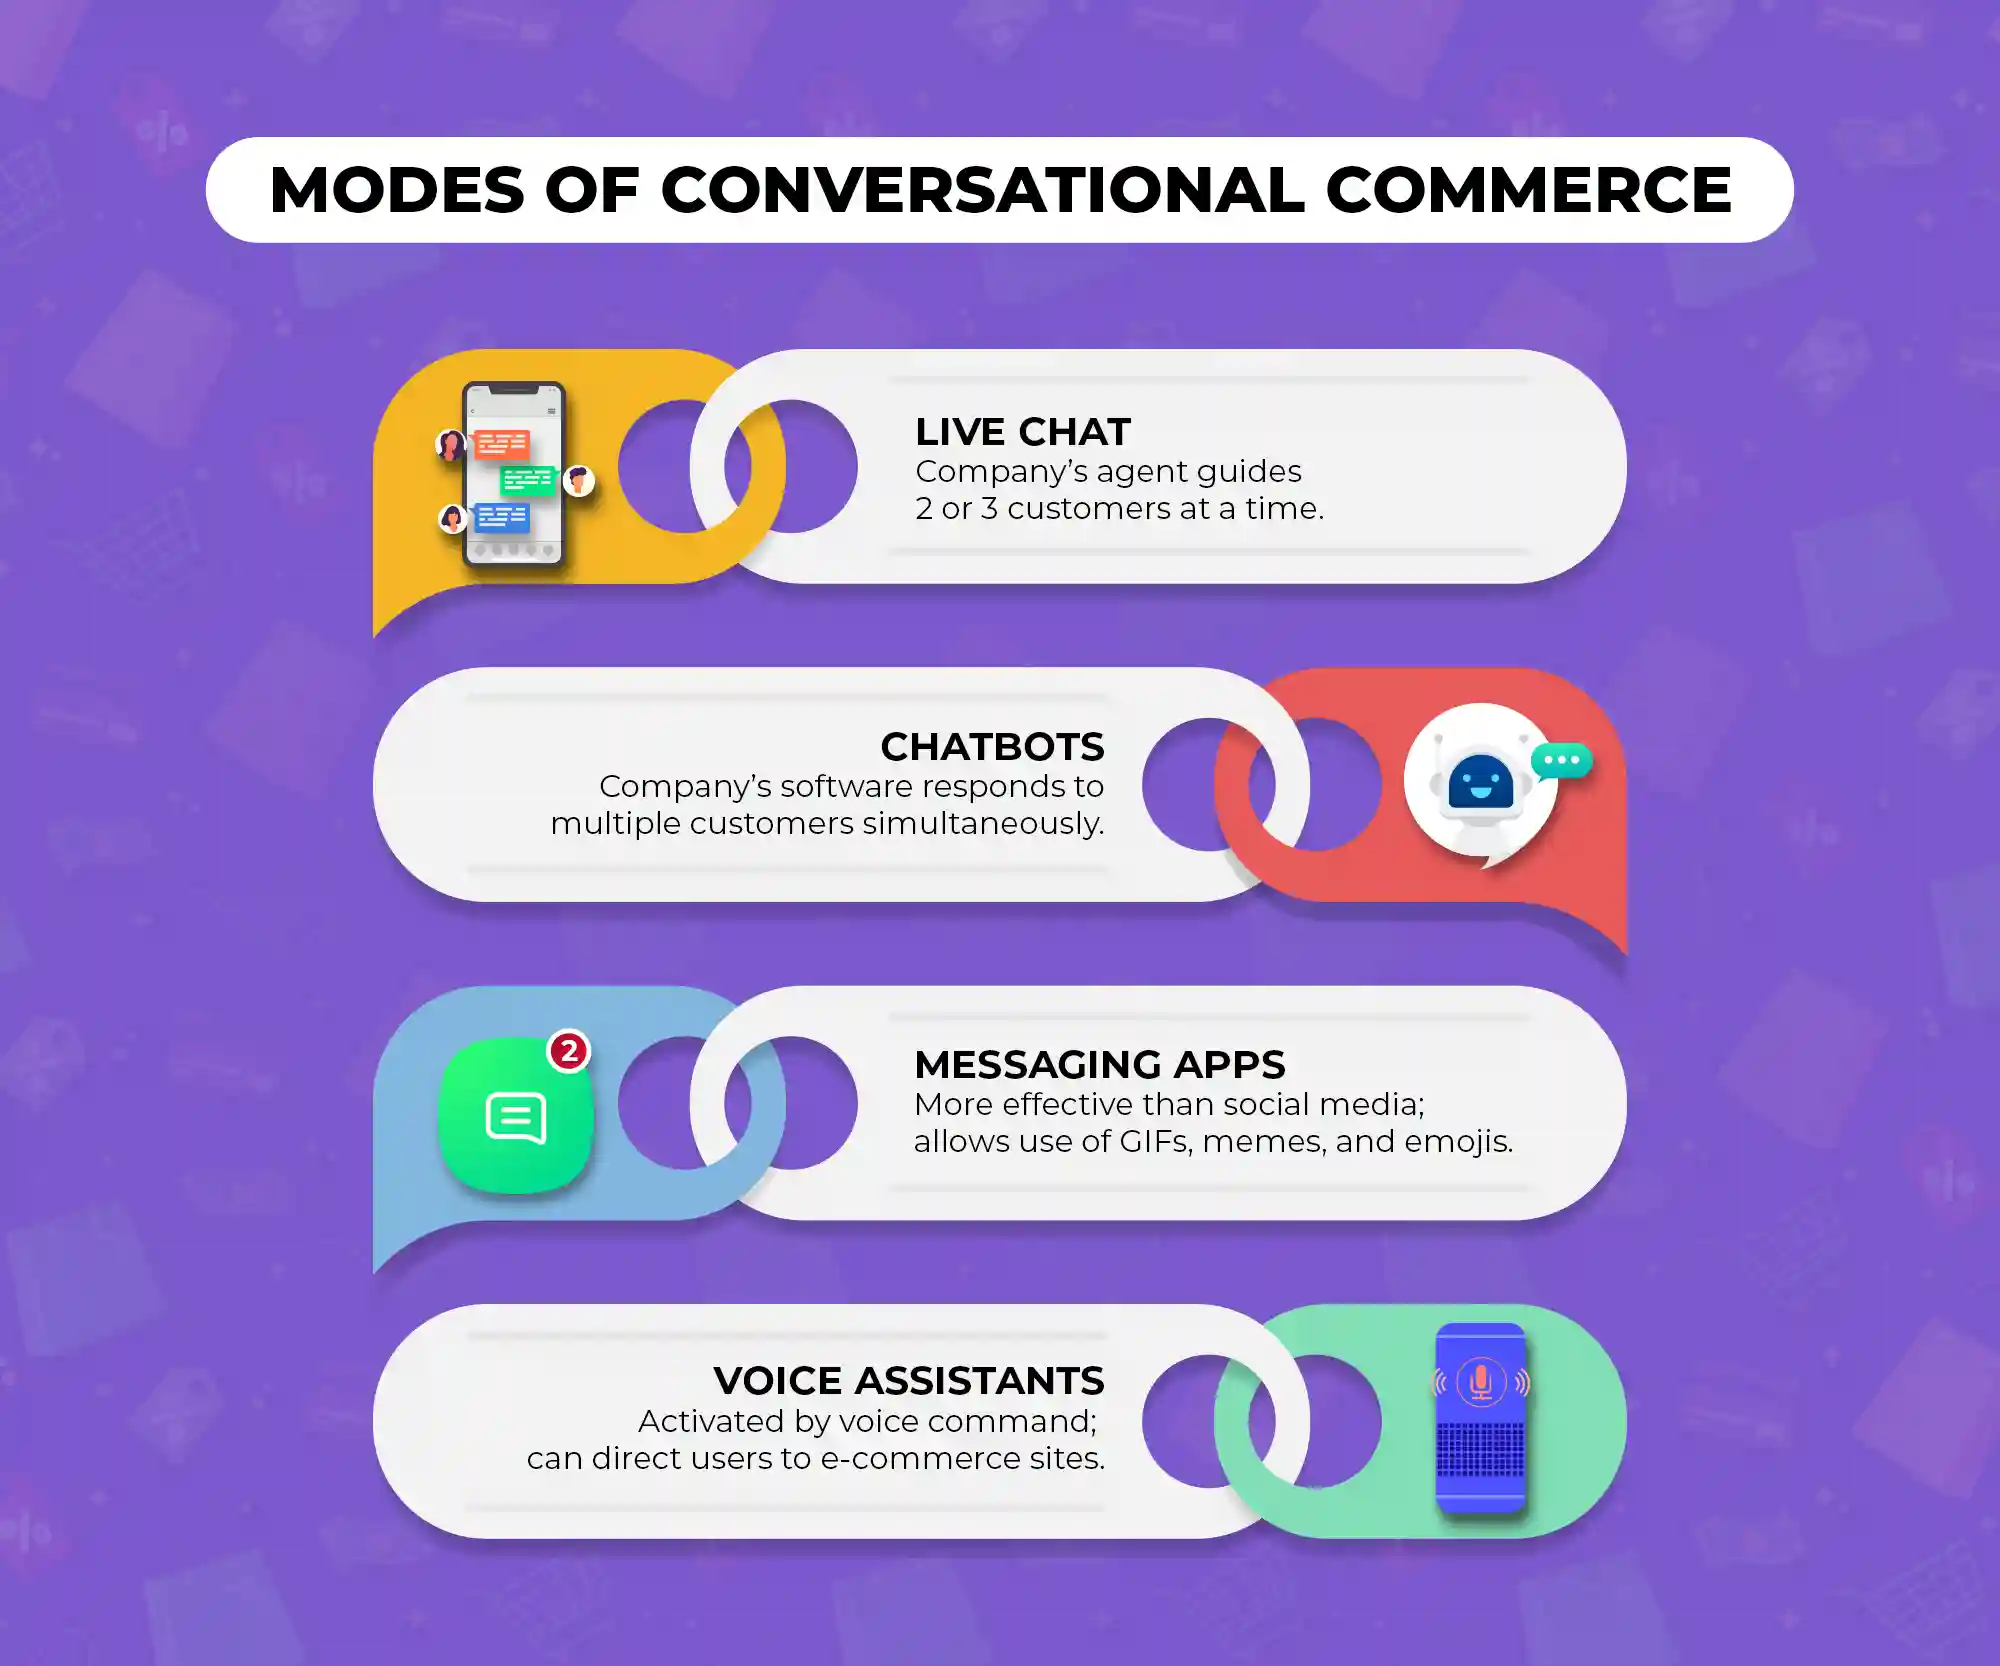 Modes of conversational commerce